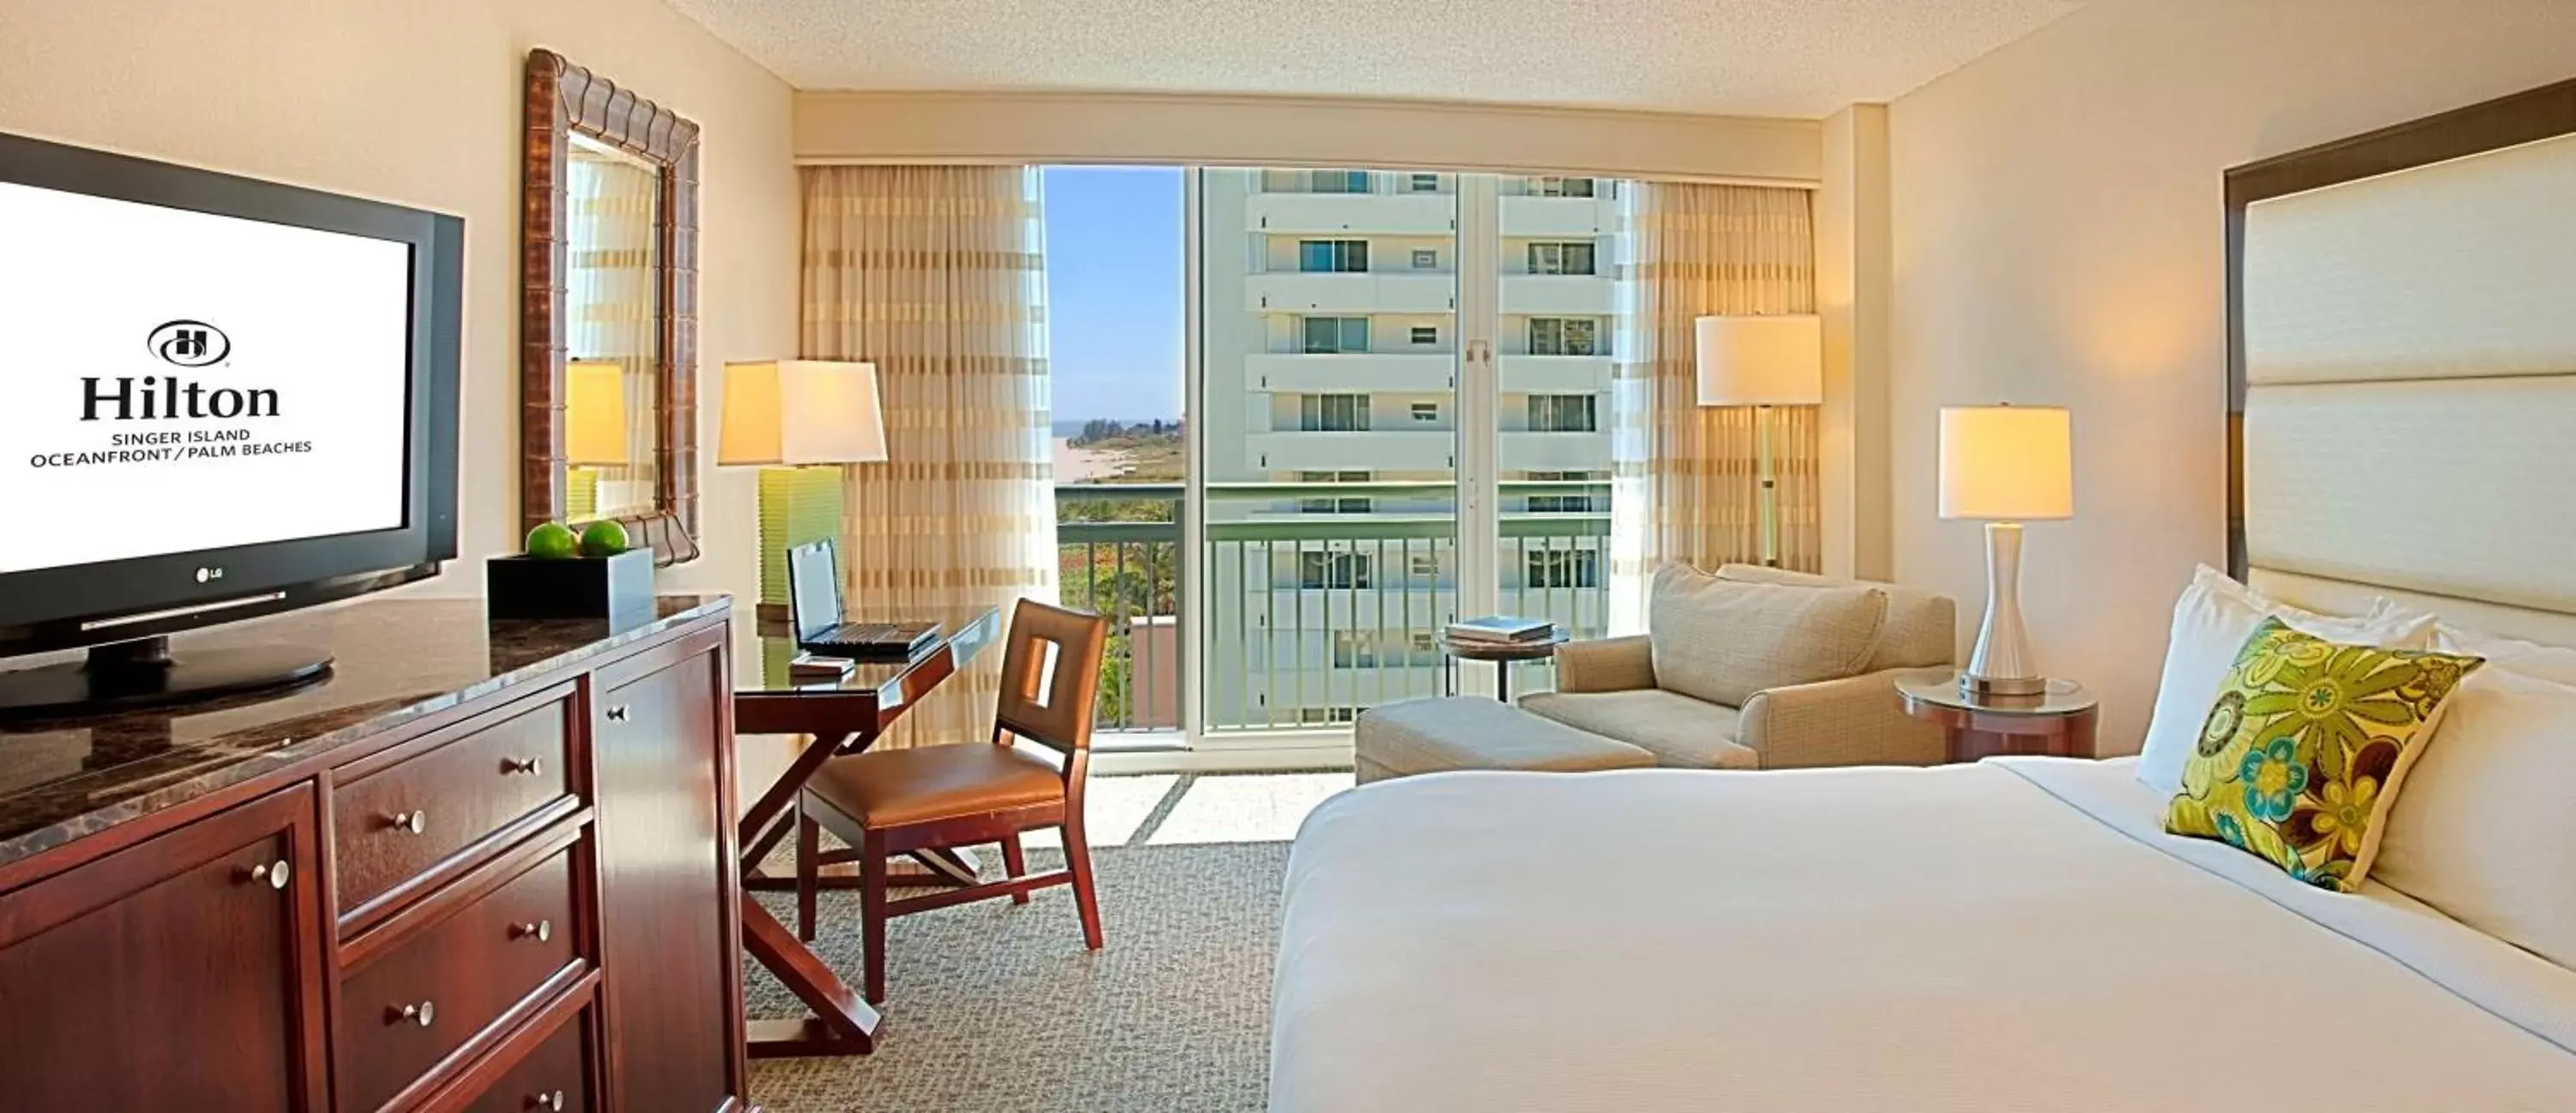 Bed, Seating Area in Hilton Singer Island Oceanfront Palm Beaches Resort